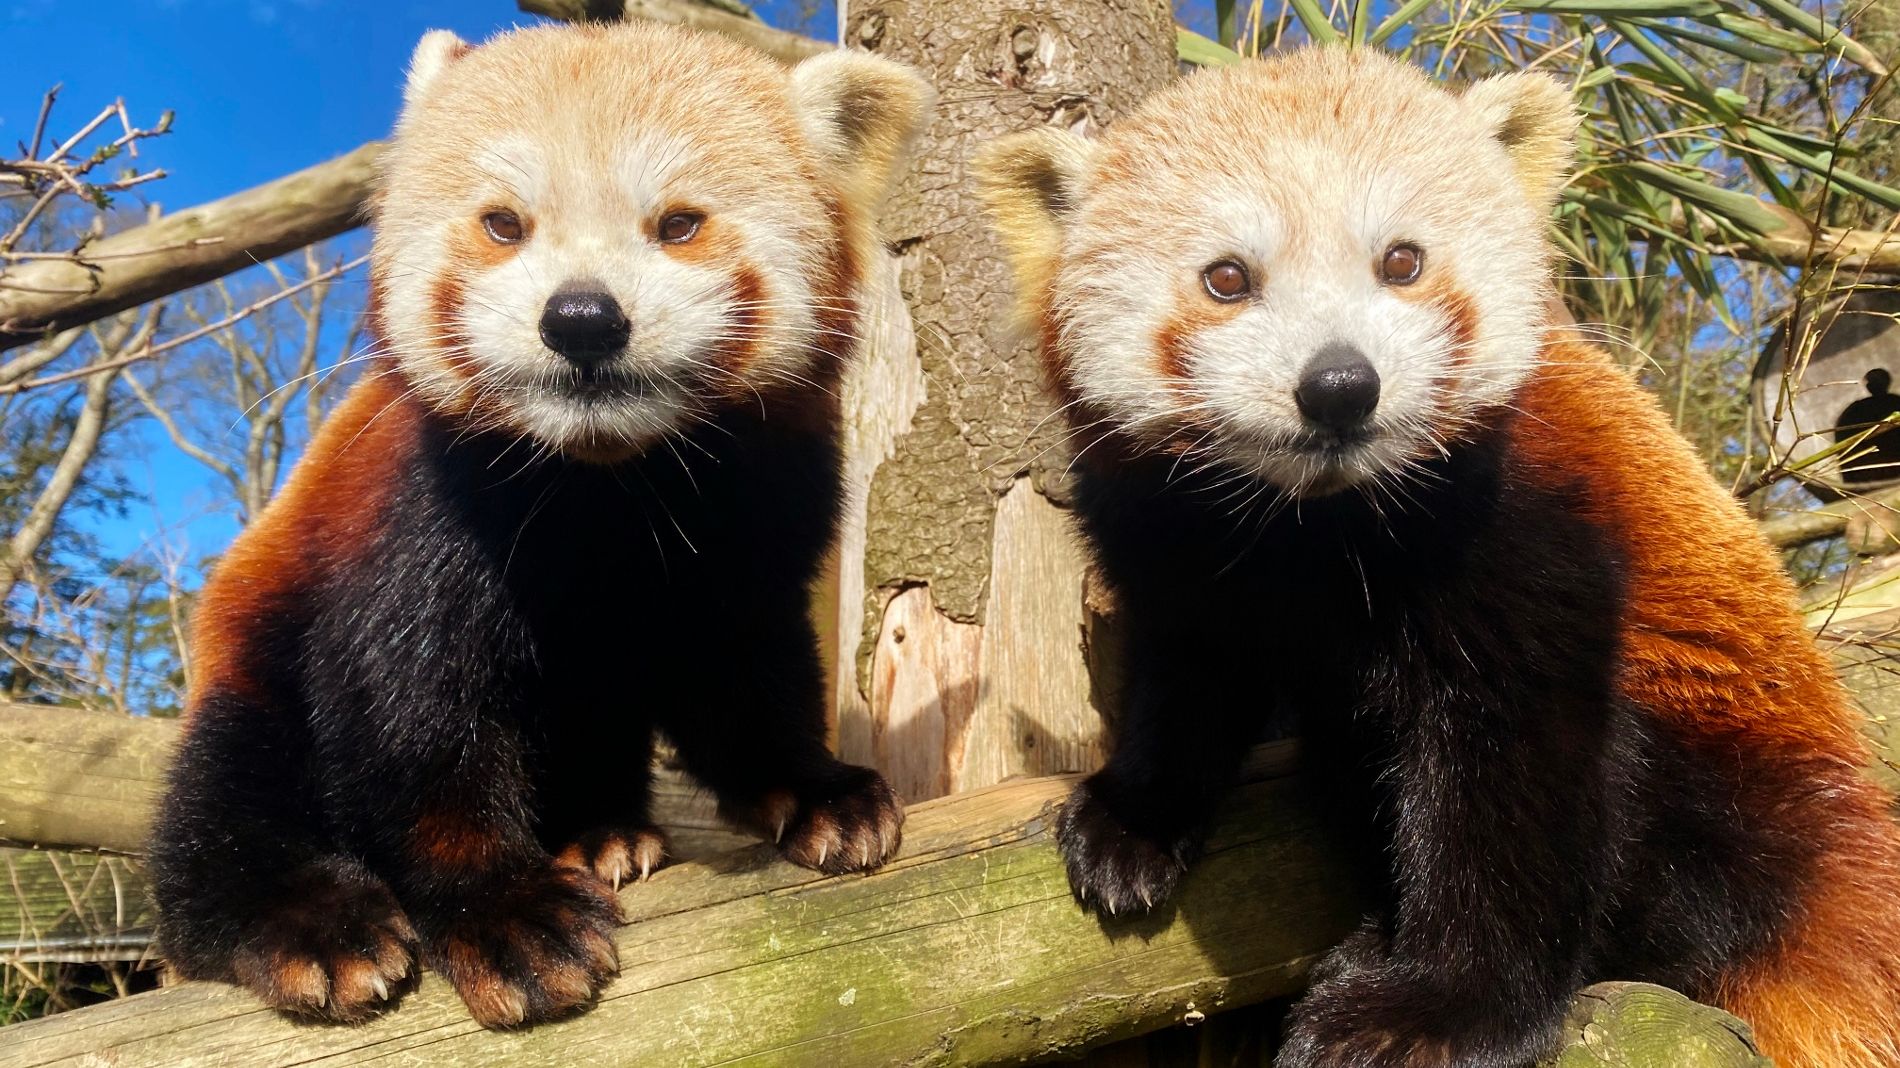 Rare Red Panda Twins Make First Public Appearance At Longleat Ghr